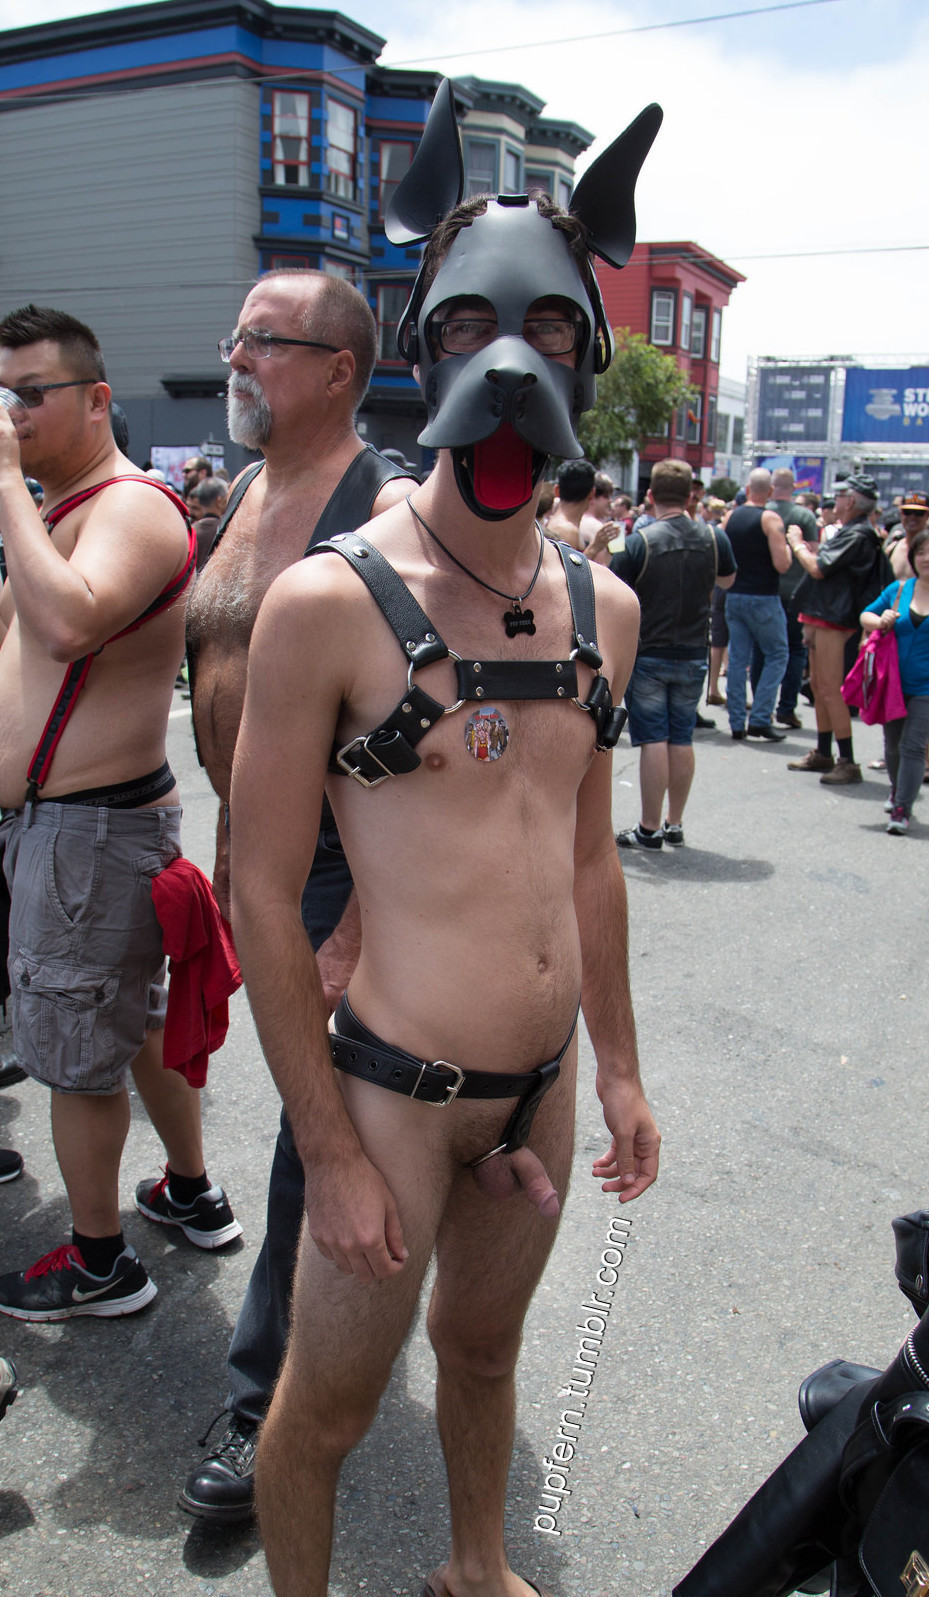 Who’s ready for Folsom??  I have my outfit picked out! Say hi if you see me on